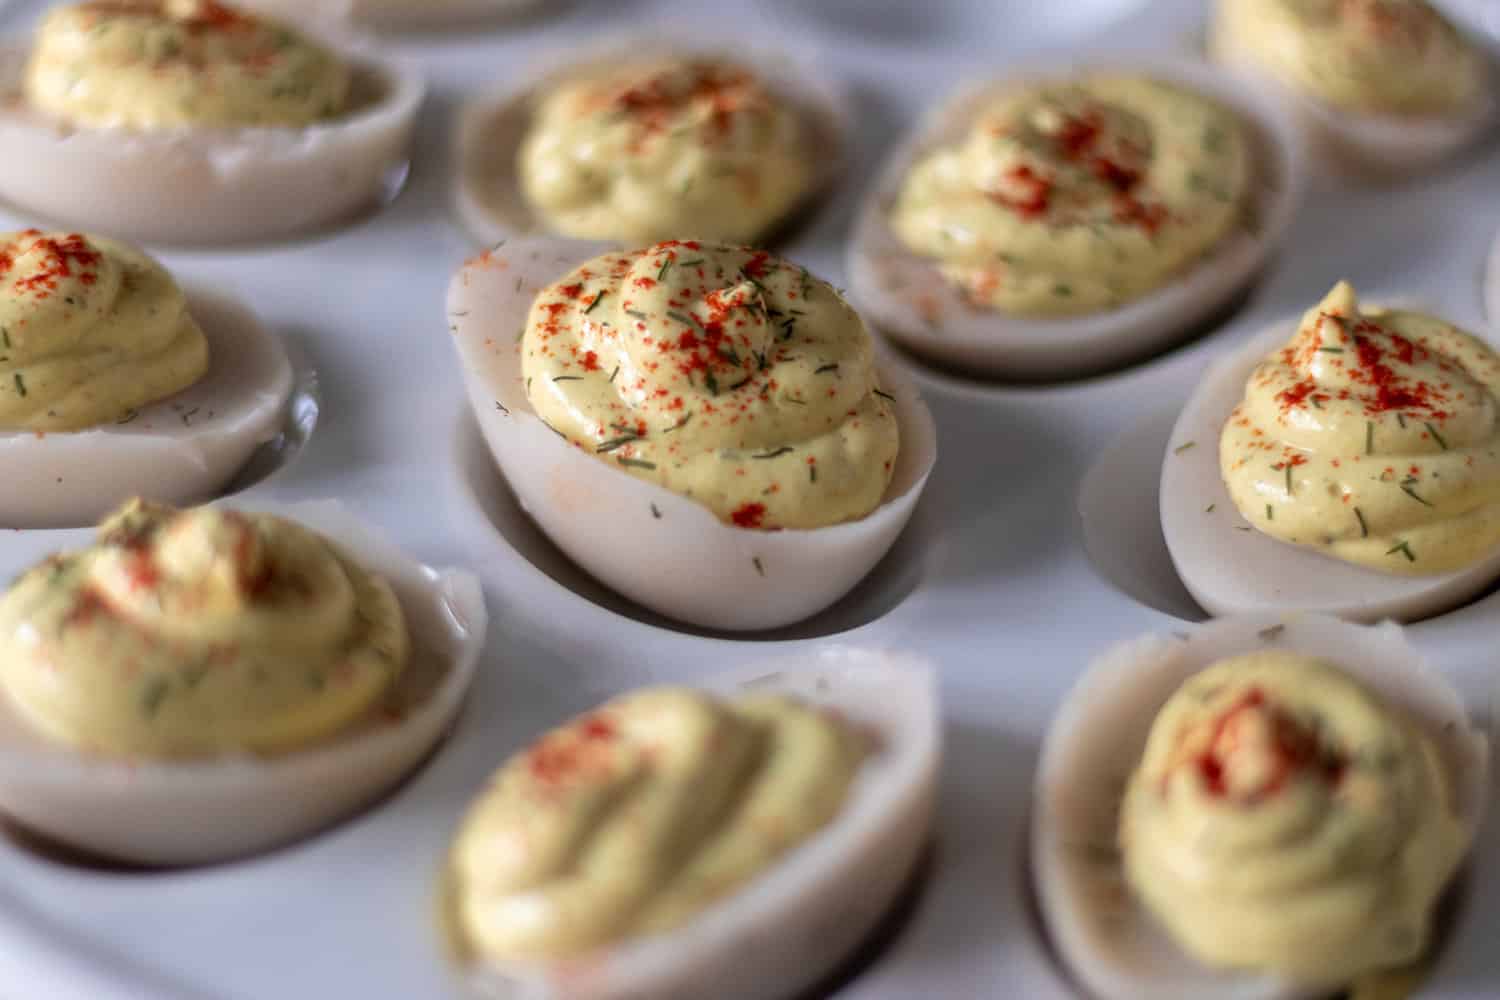 A close up view of several vegan deviled eggs.